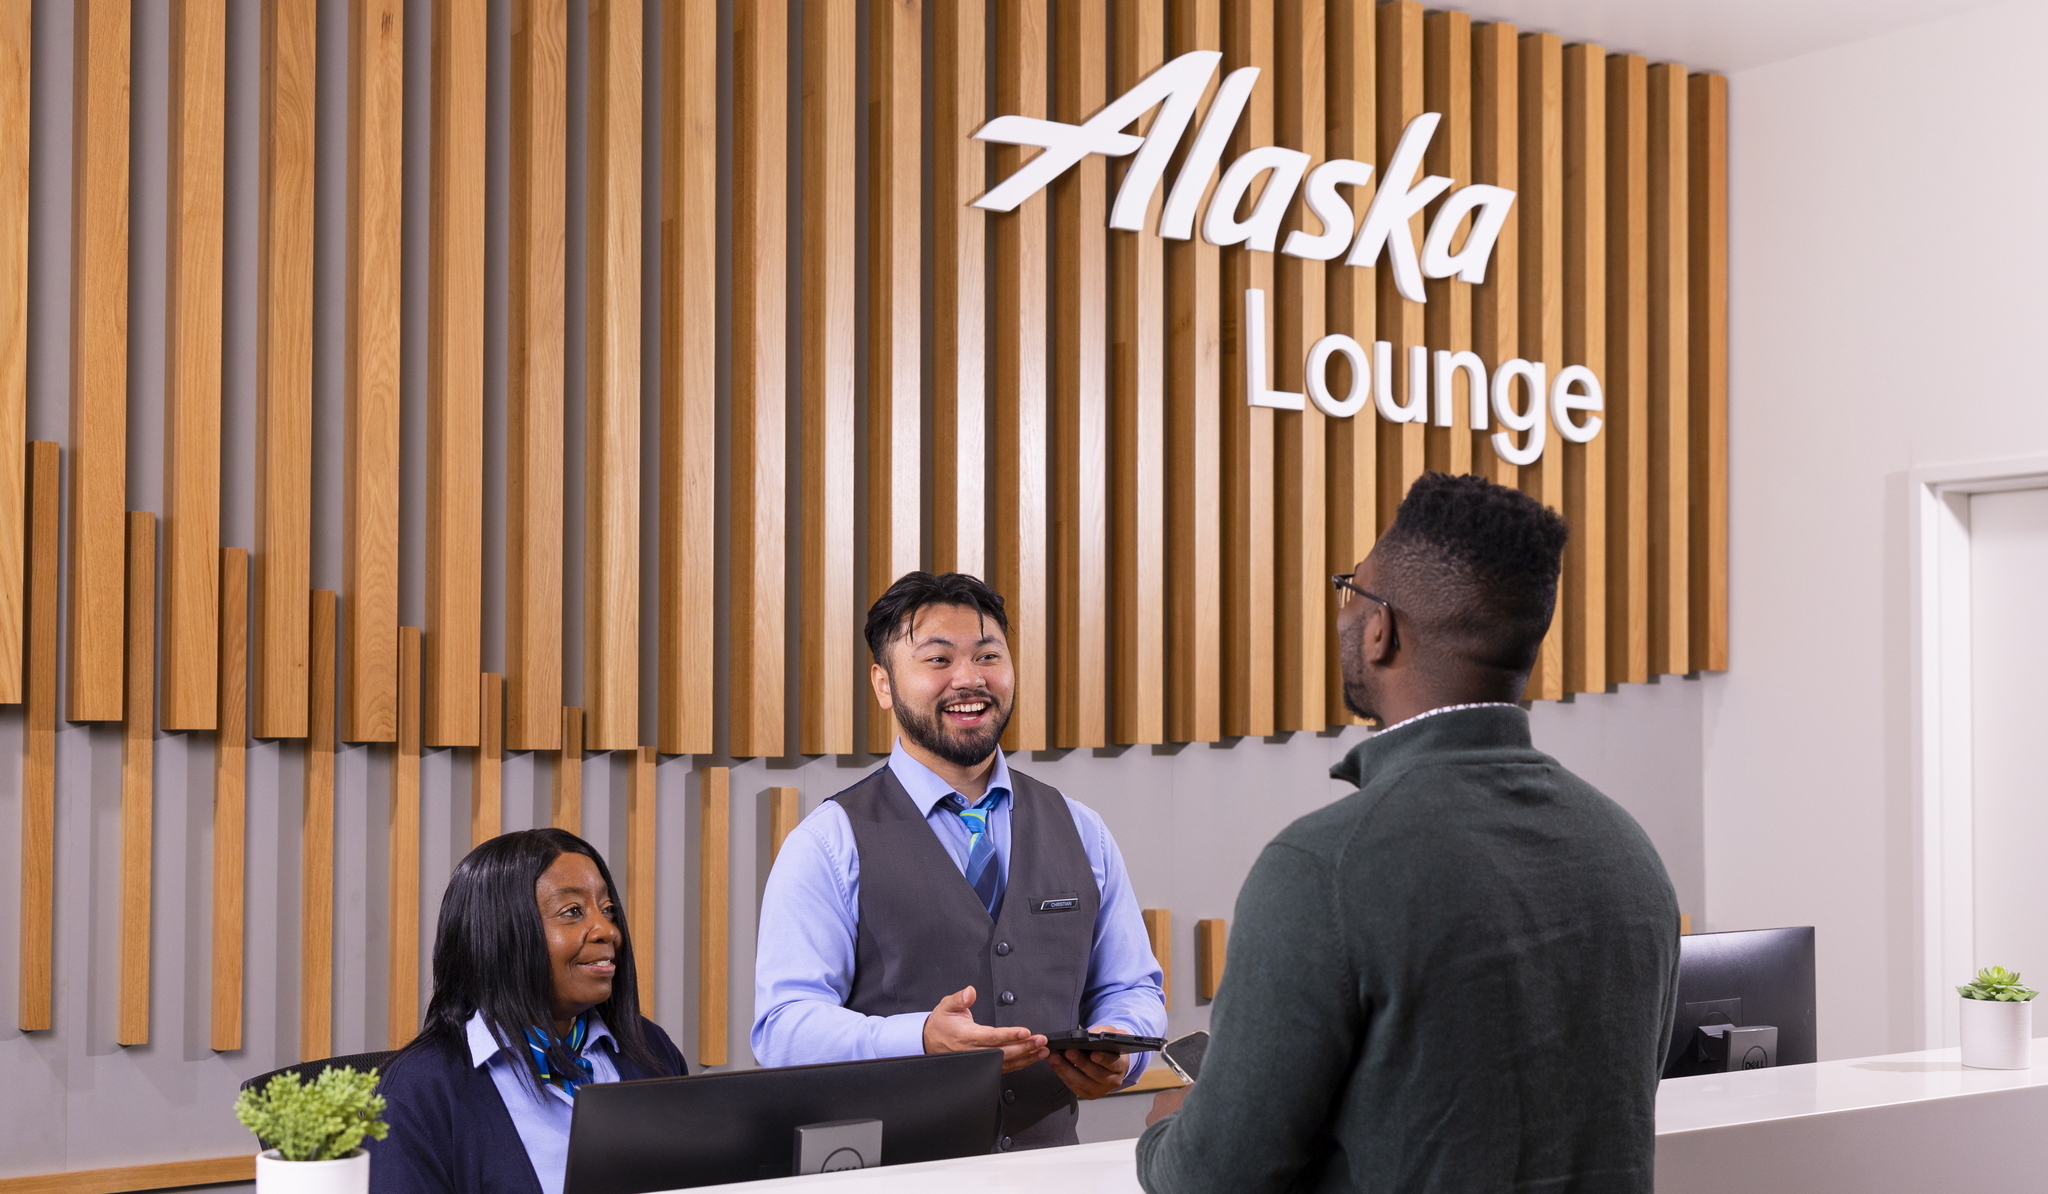 people at entrance of Alaska Airlines lounge.